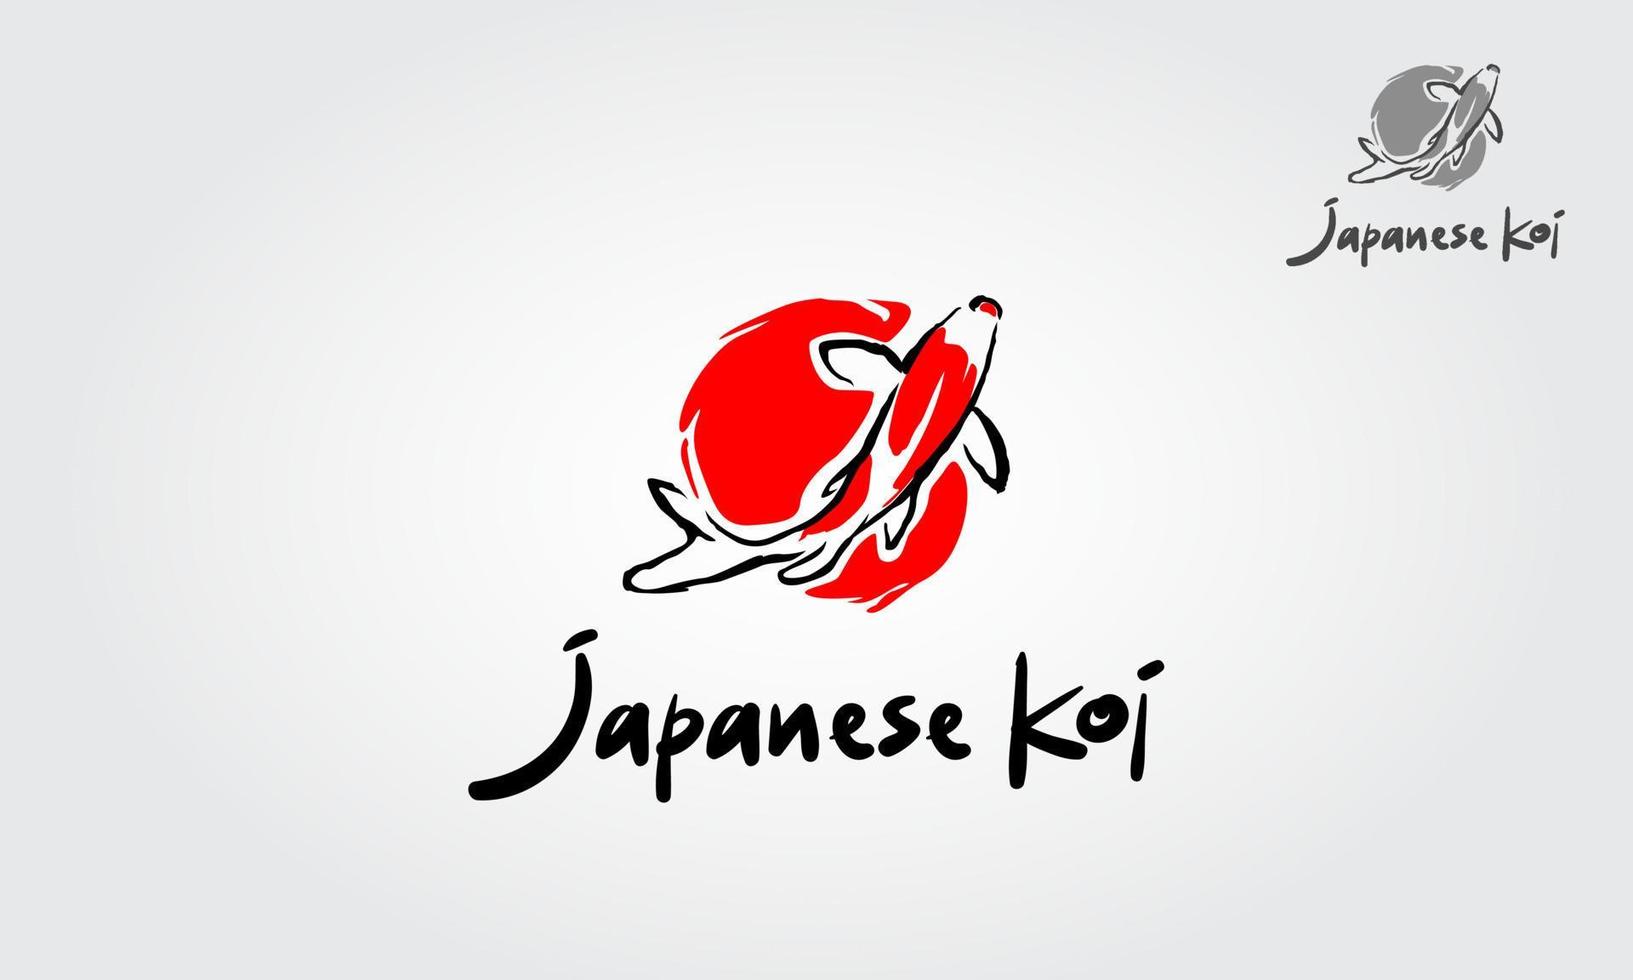 Japanese Koi Logo Template. This logo perfectly used for any fishing or aquarium related businesses. vector